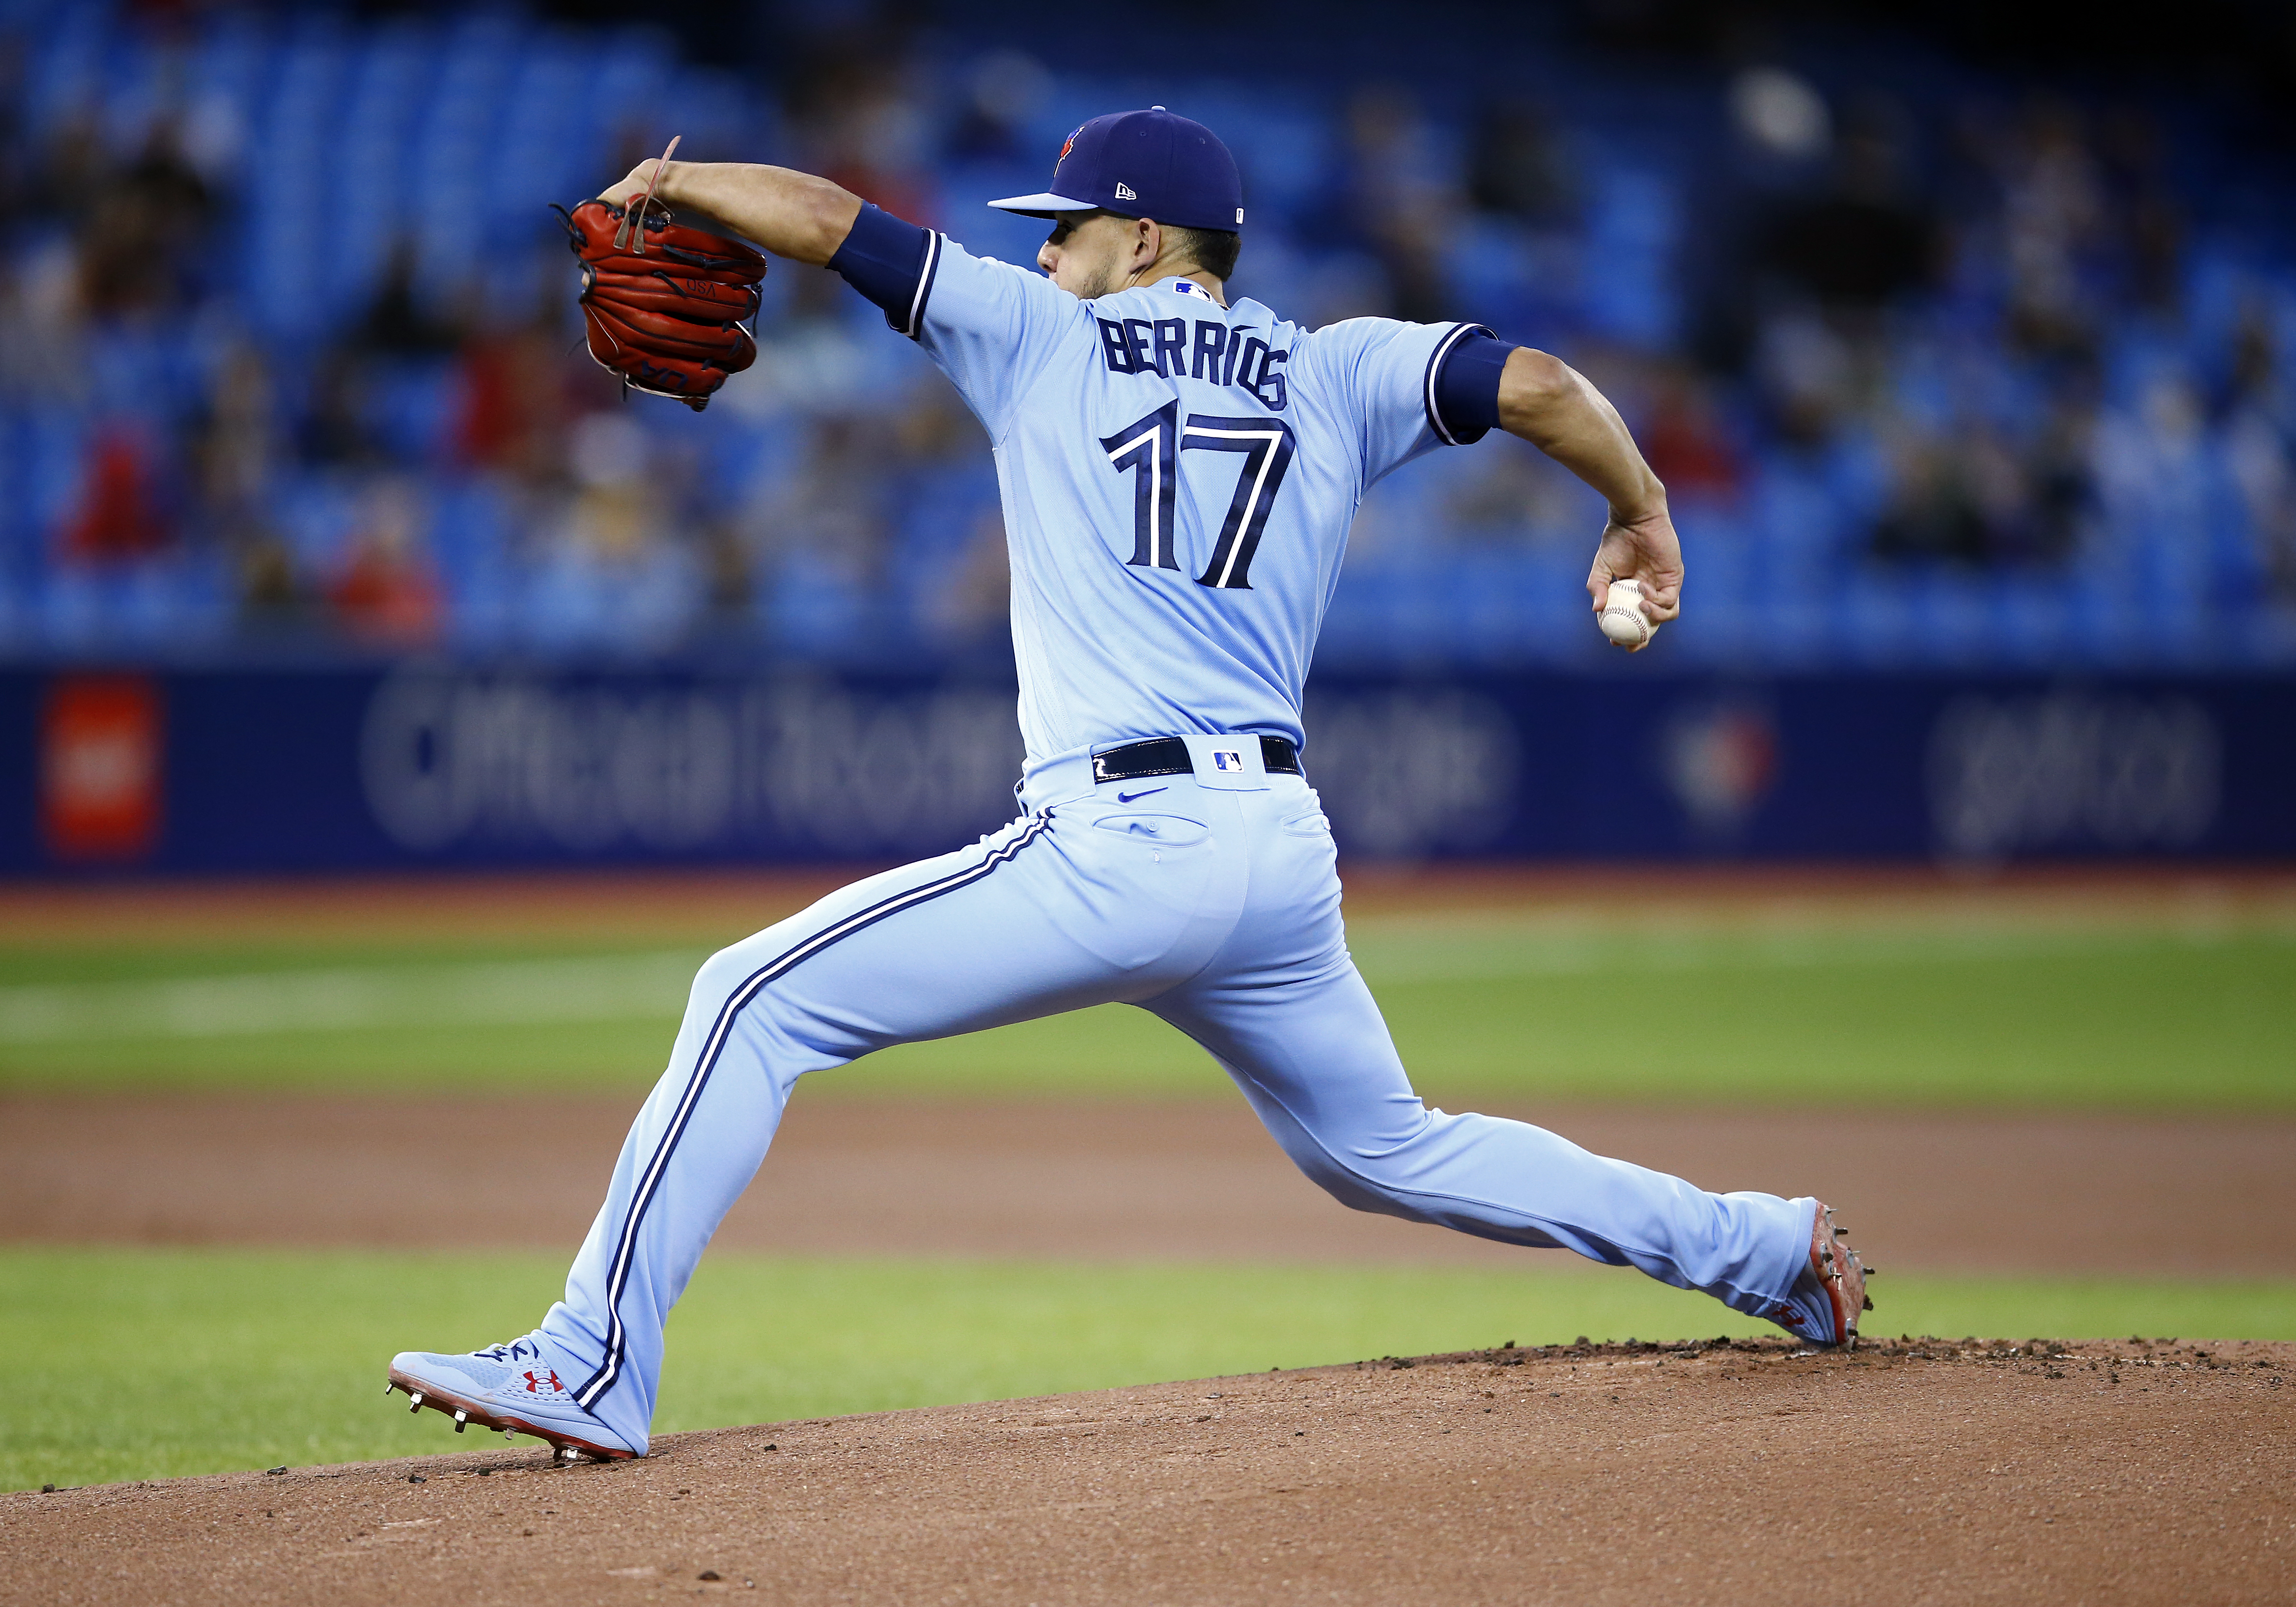 Jose Berrios #17 of the Toronto Blue Jays delivers a pitch in the first inning during a MLB game against the New York Yankees at Rogers Centre on September 29, 2021 in Toronto, Ontario, Canada.